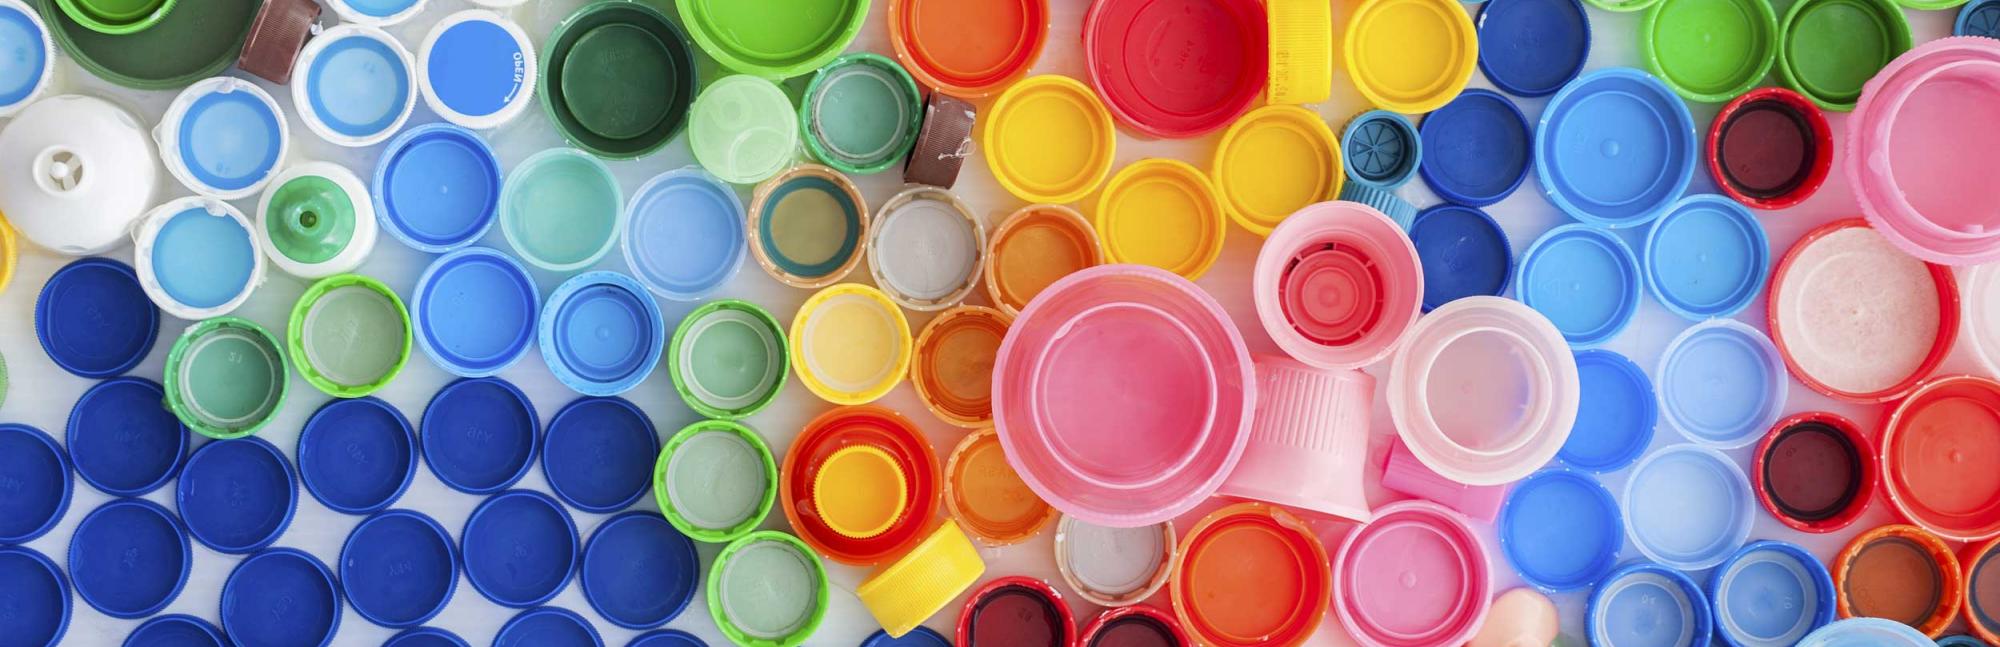 Lots of brightly coloured plastic bottle lids